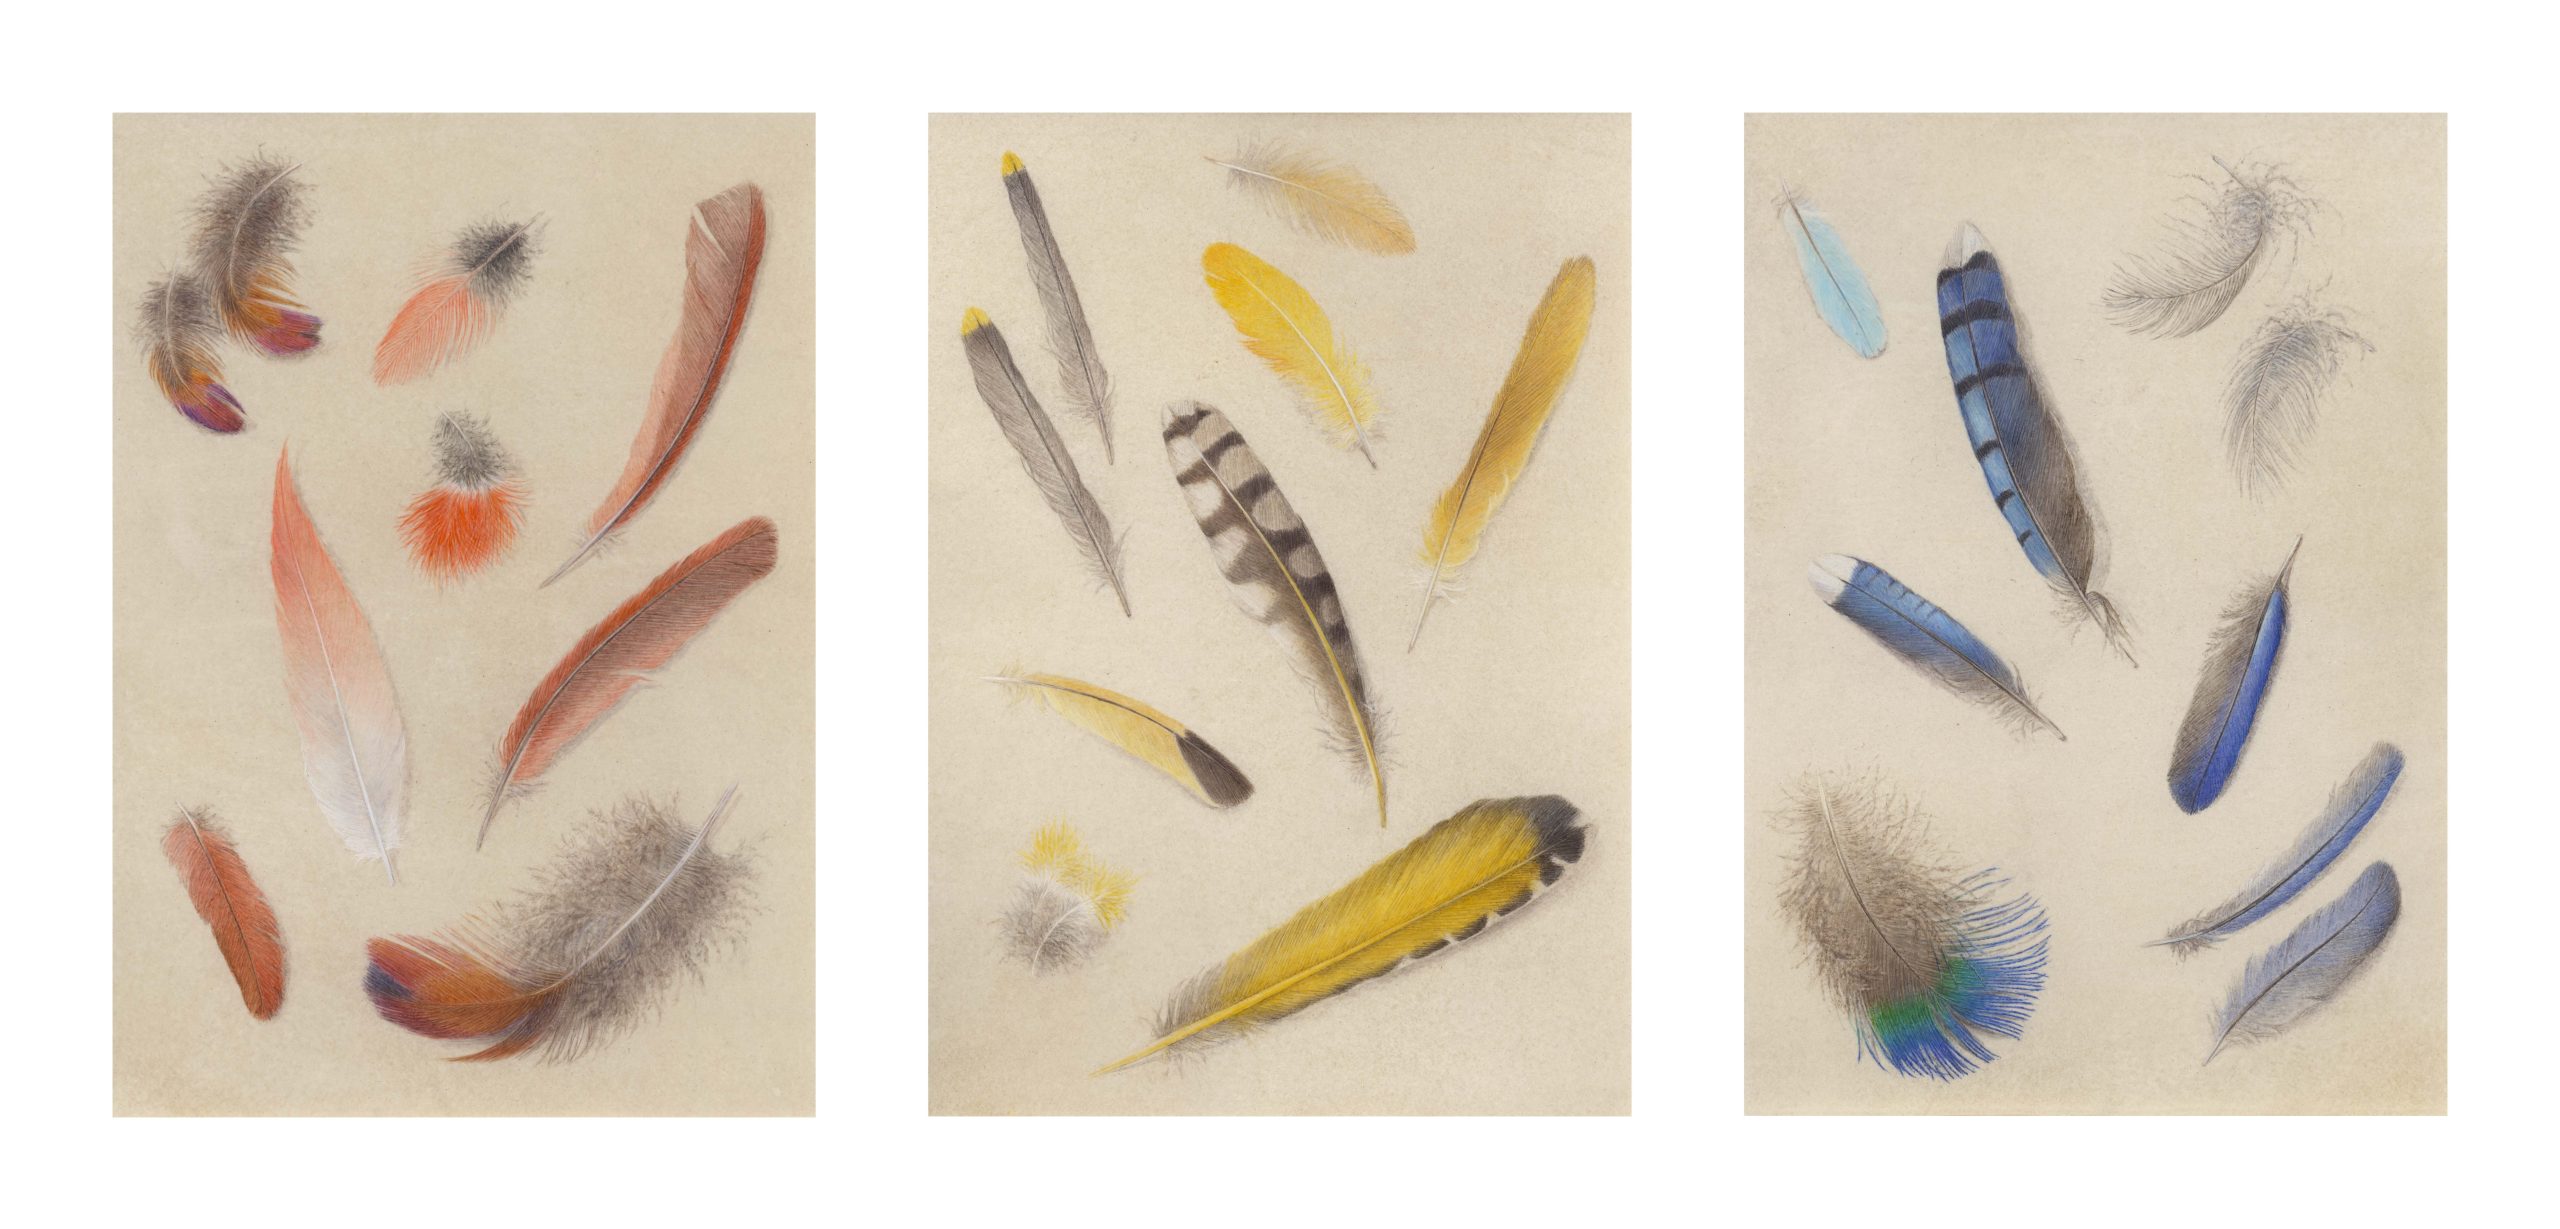 A triptych that depicts multiple feathers utilizes a primary color scheme with red feathers on the right, yellow feathers in the center, and blue feathers on the right